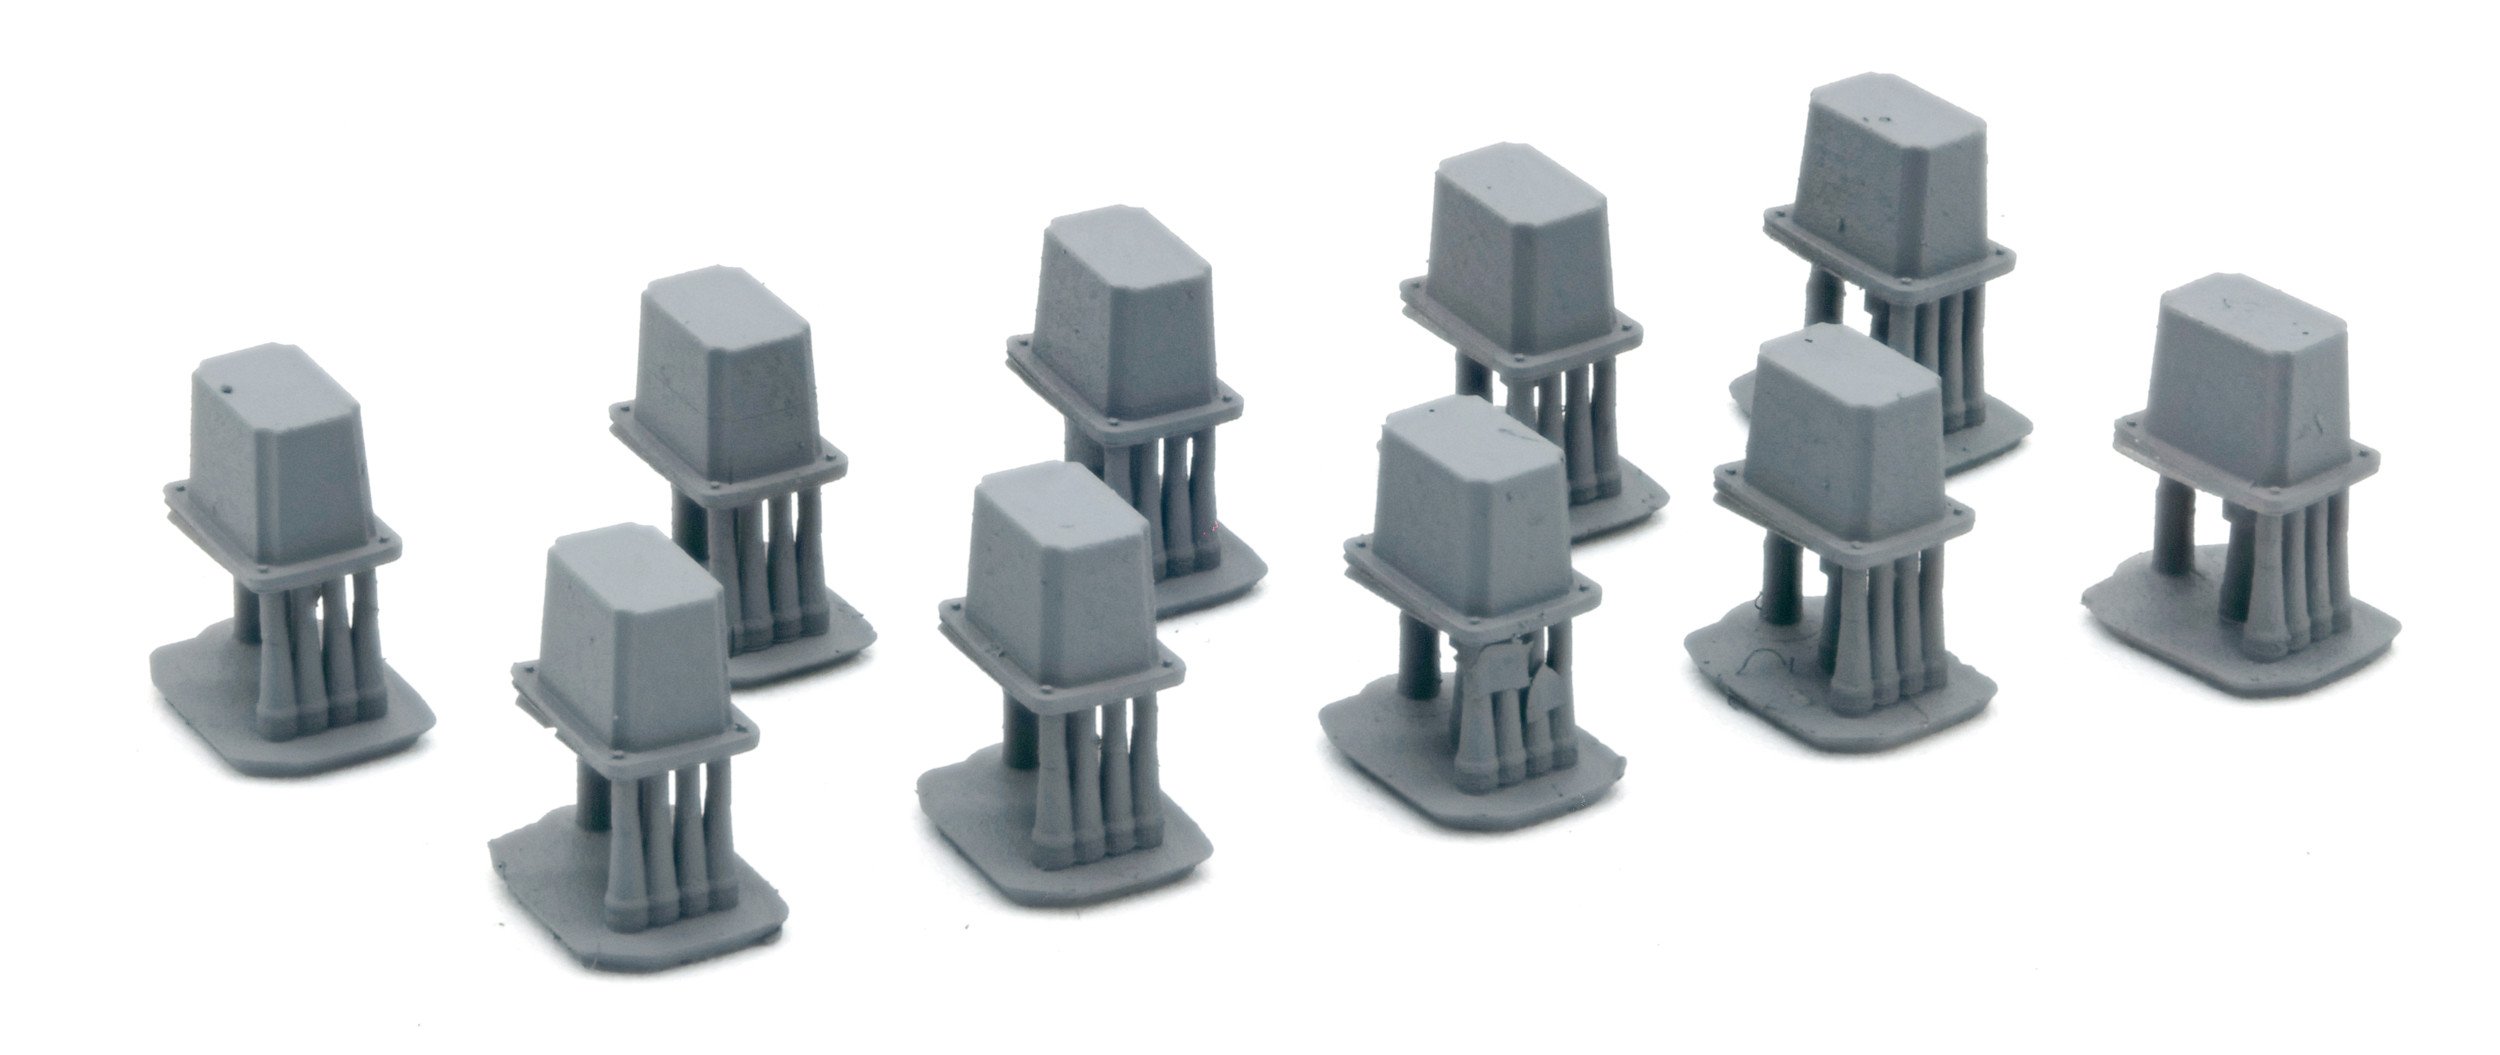 The 3D printed axle counters are supplied as a 10 pack for £2.99.